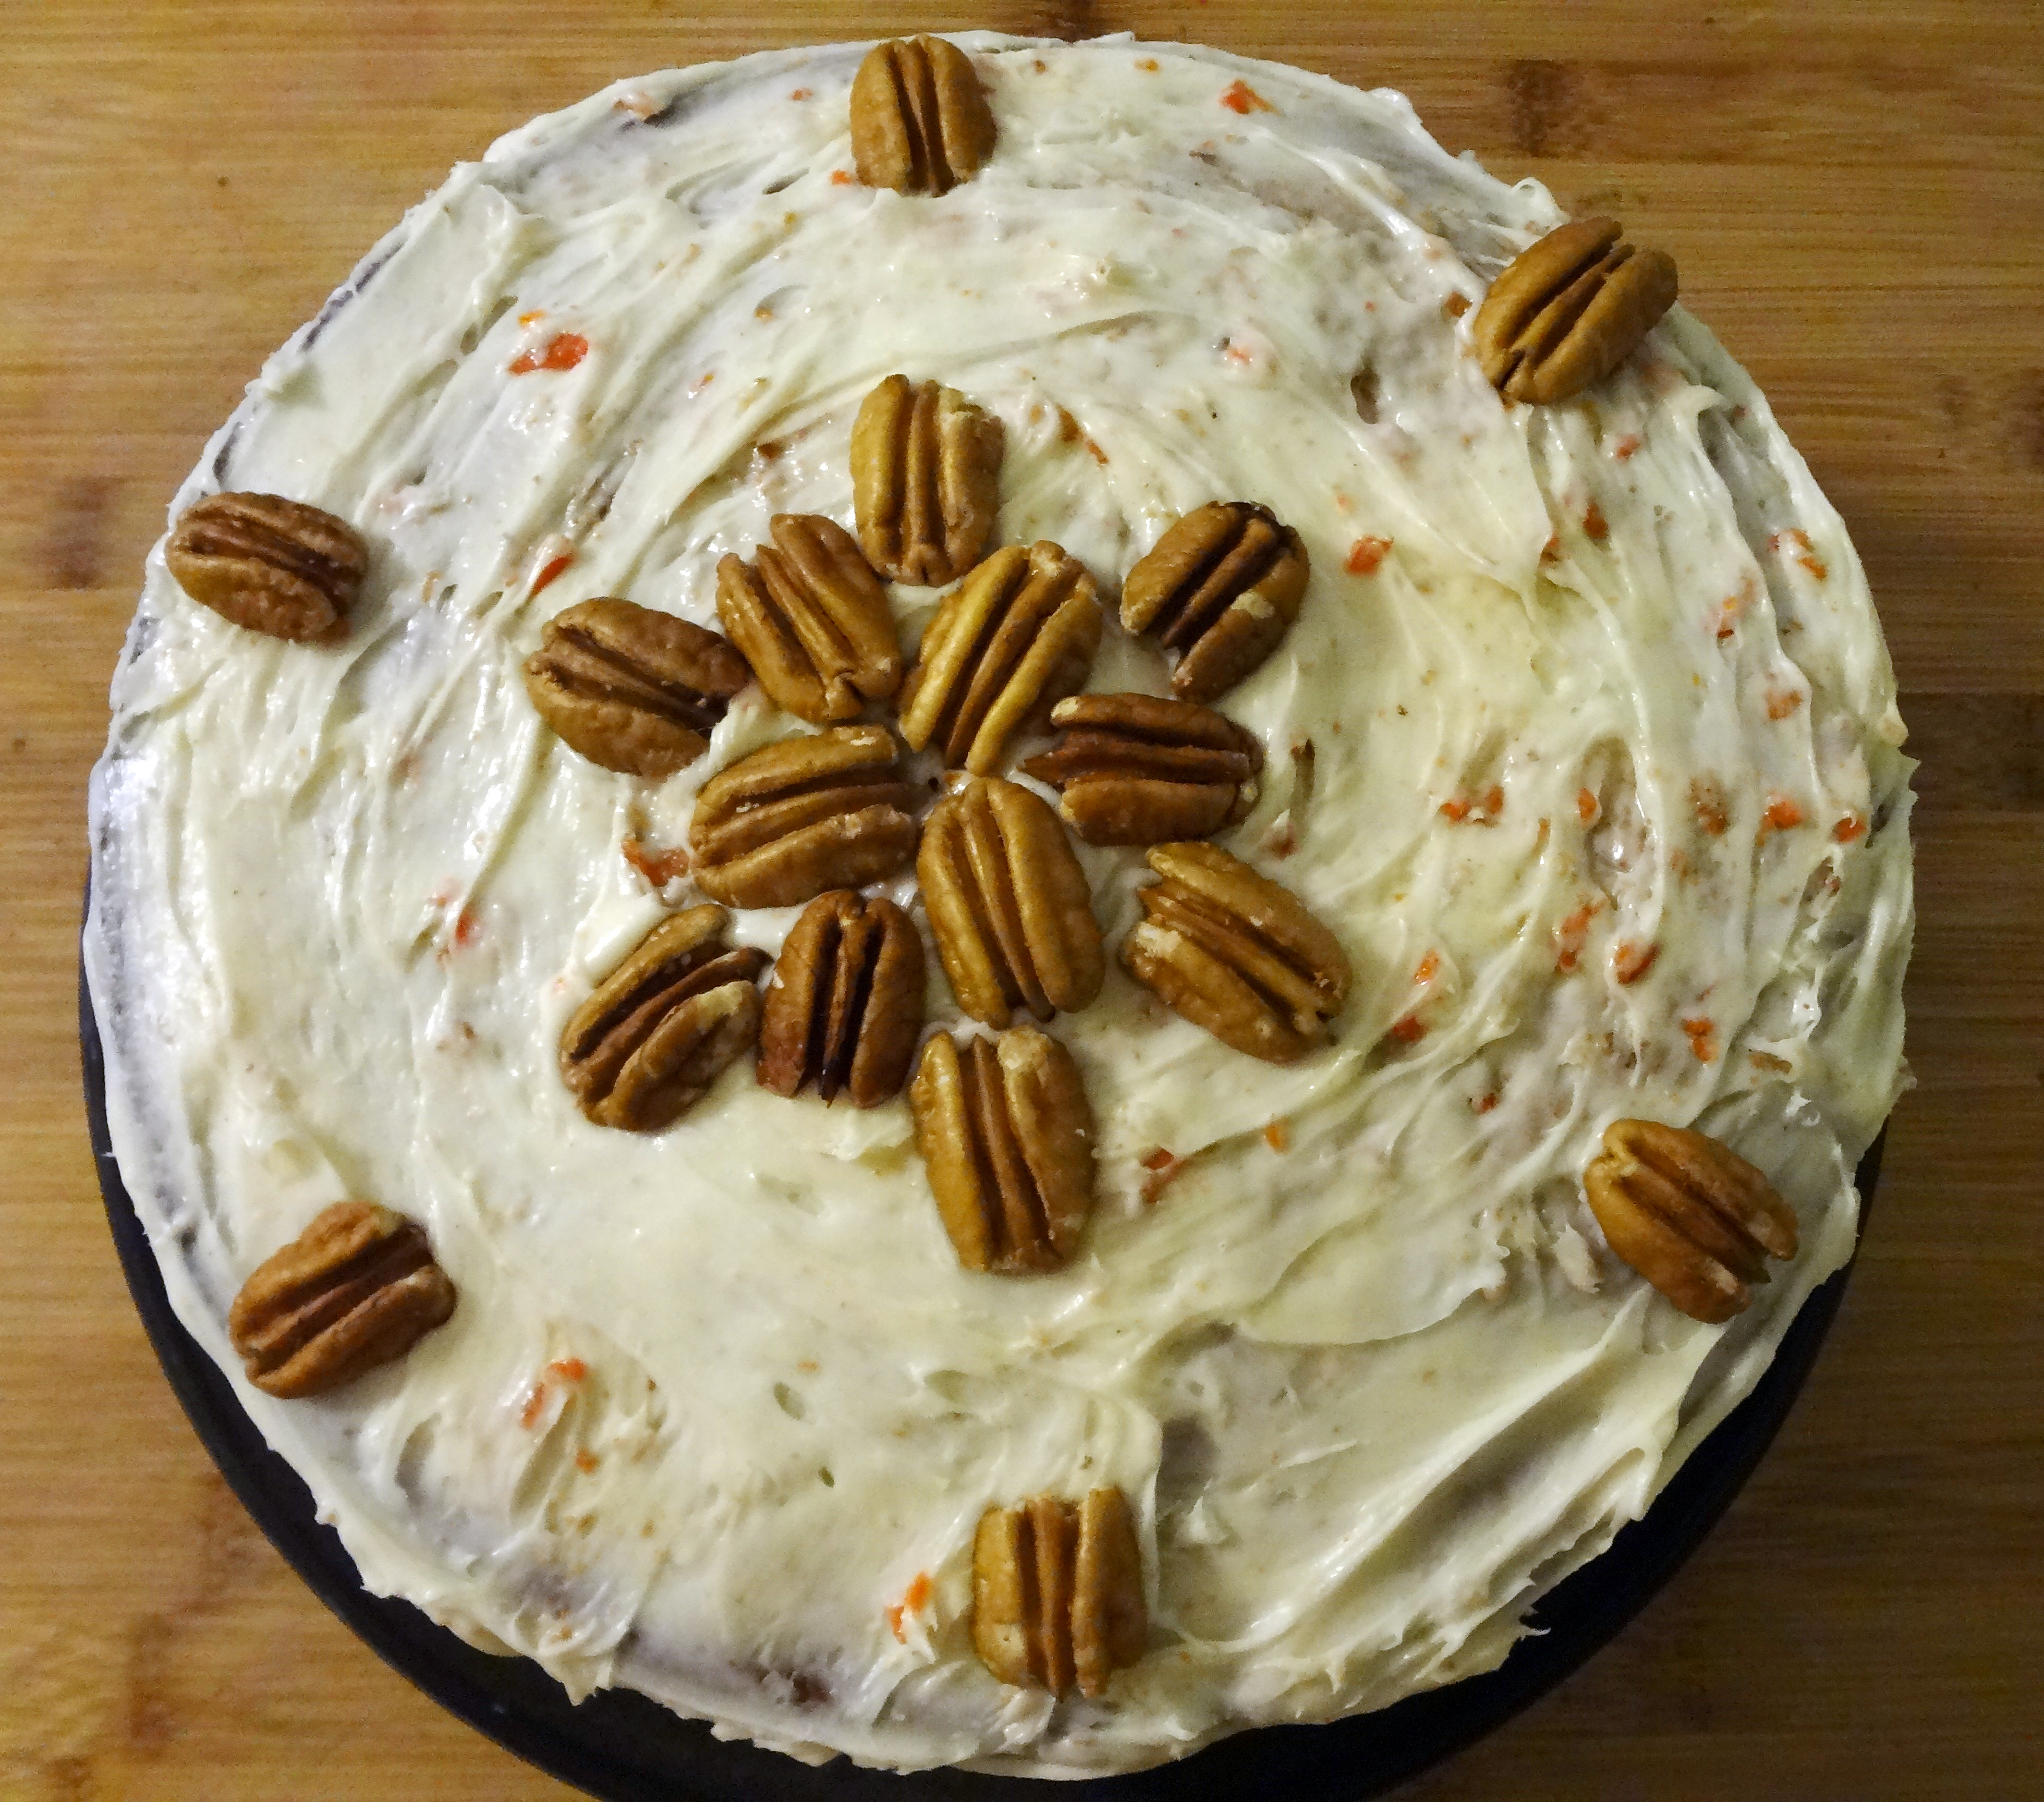 the finished carrot cake